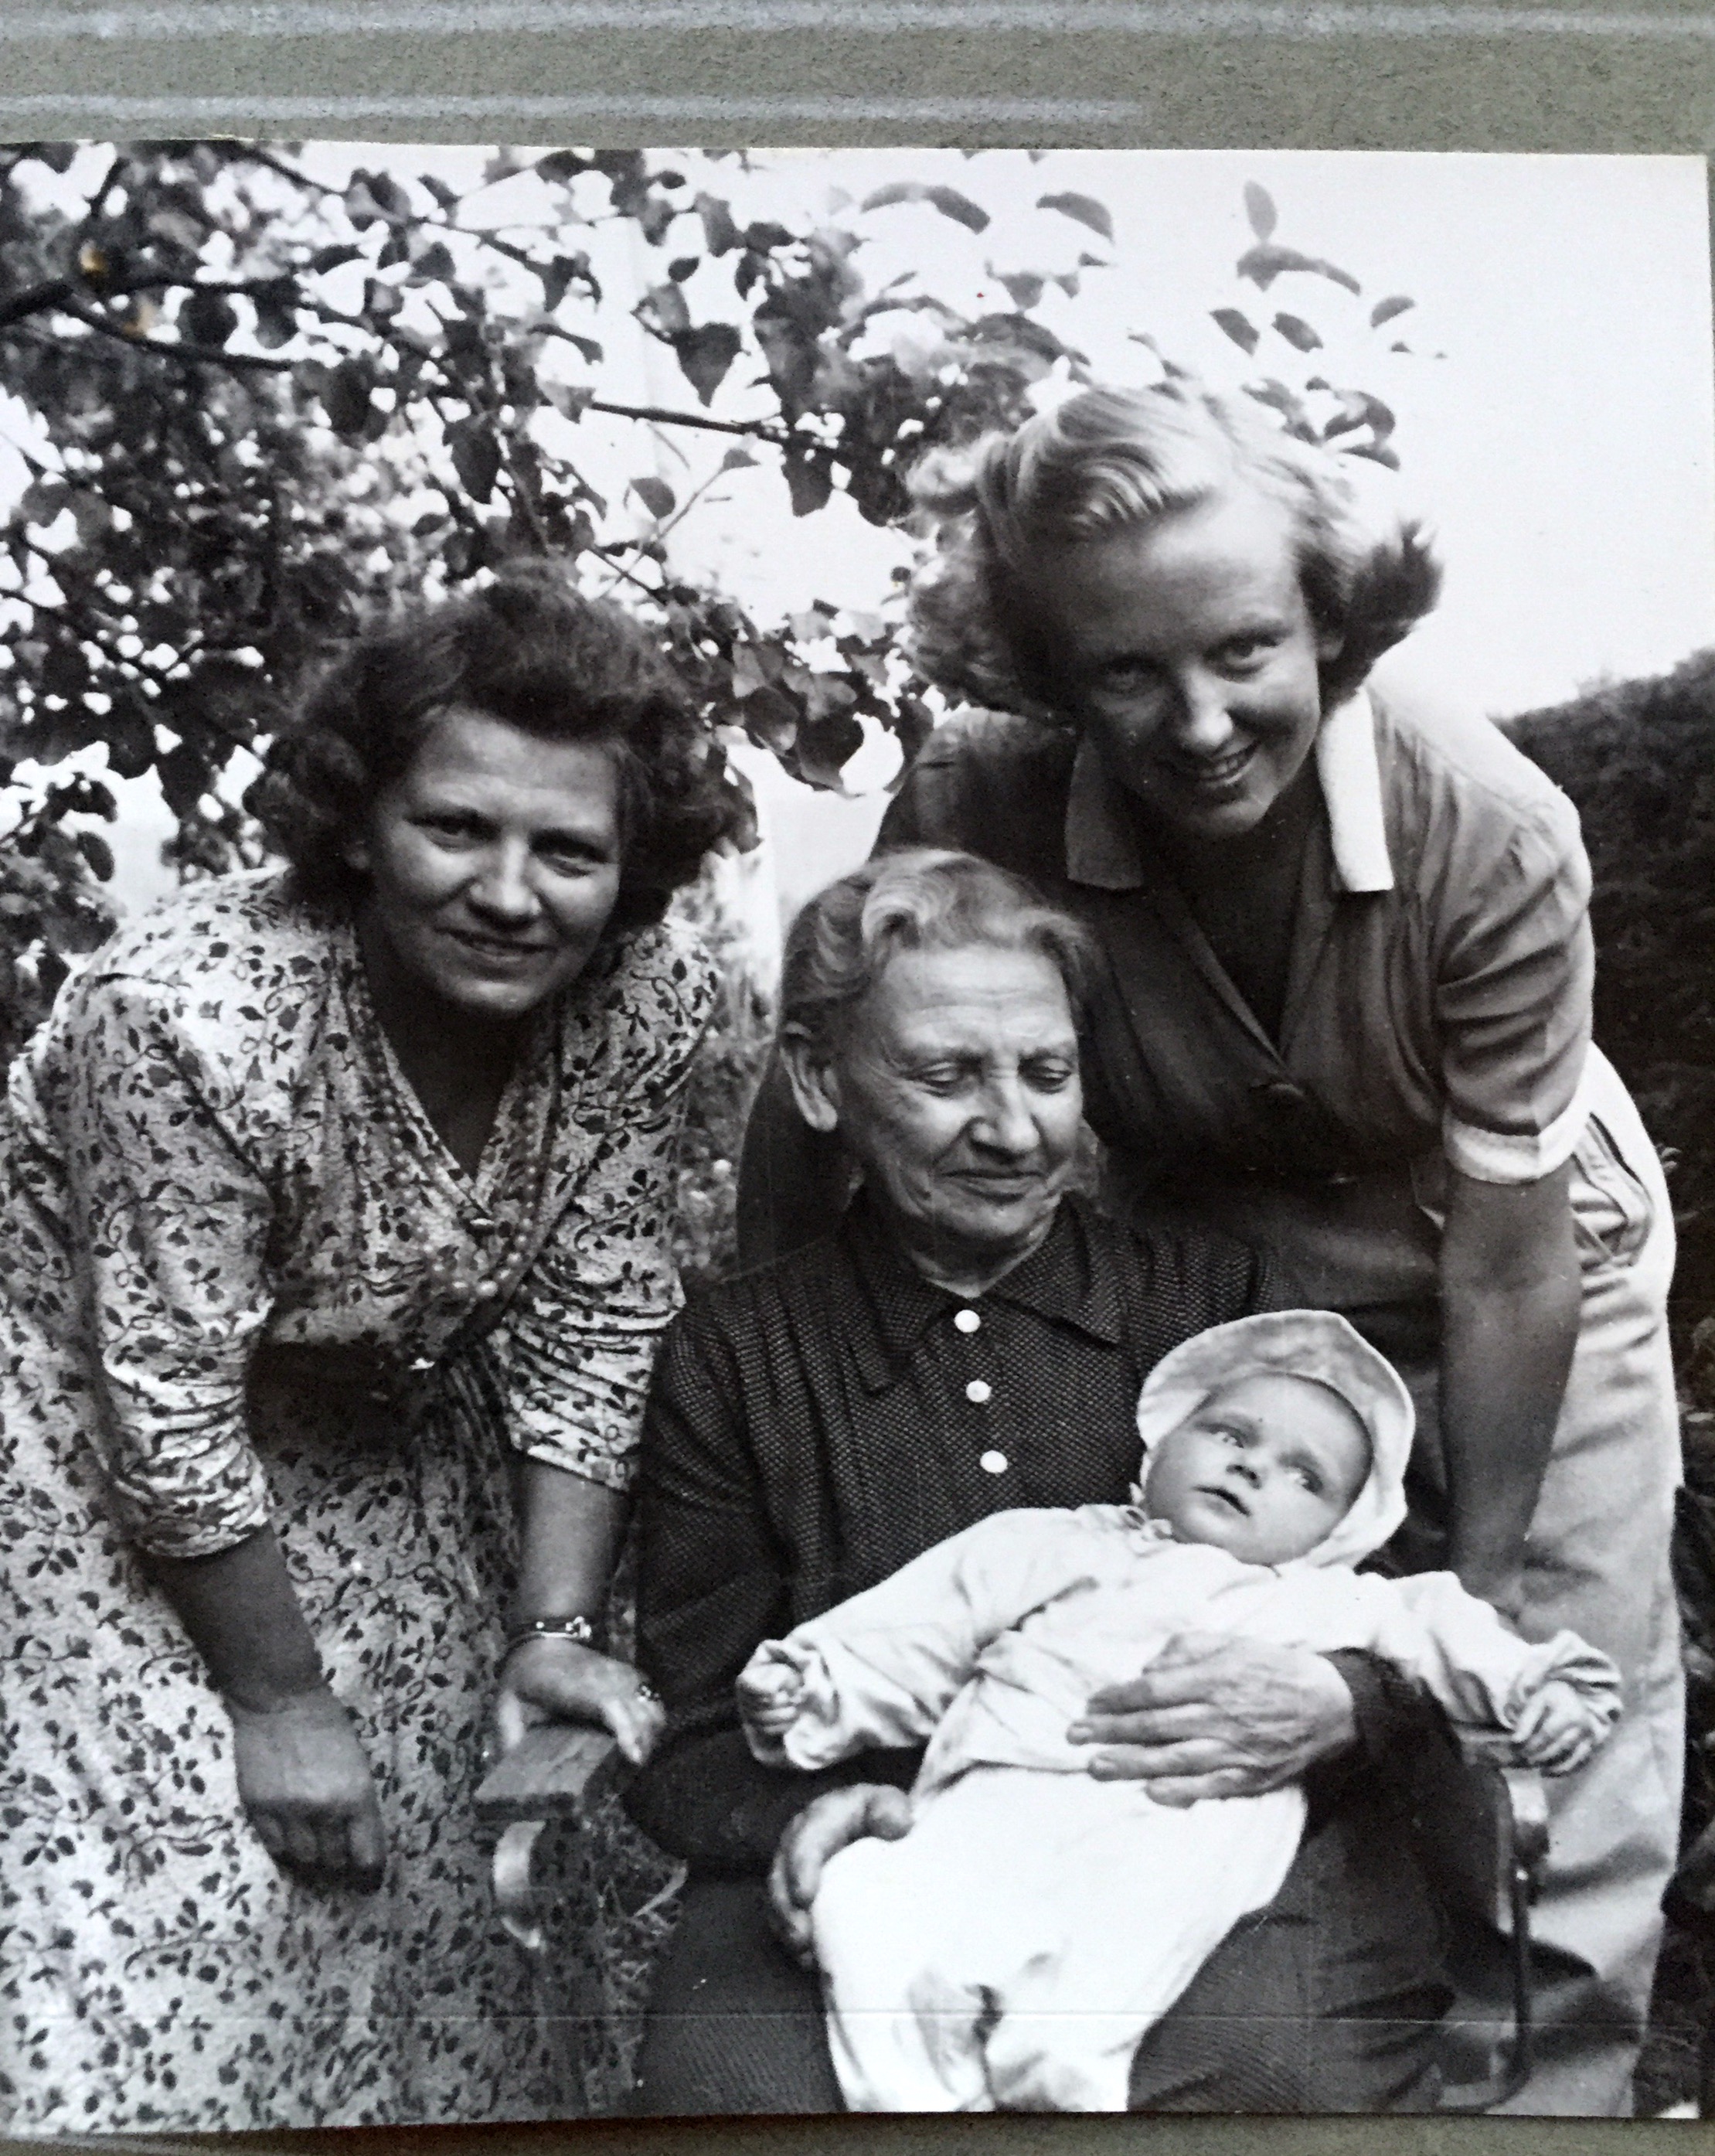 The day I was baptised, August 1953: I am resting in my great grandmother's lap - how proud she looks! Her eldest daughter, my grandmother, on the left. My mother on the right. Three strong, intelligent women who lived exciting, challenging and very different lives through more than a century. An invaluable heritage. How lucky I am! 